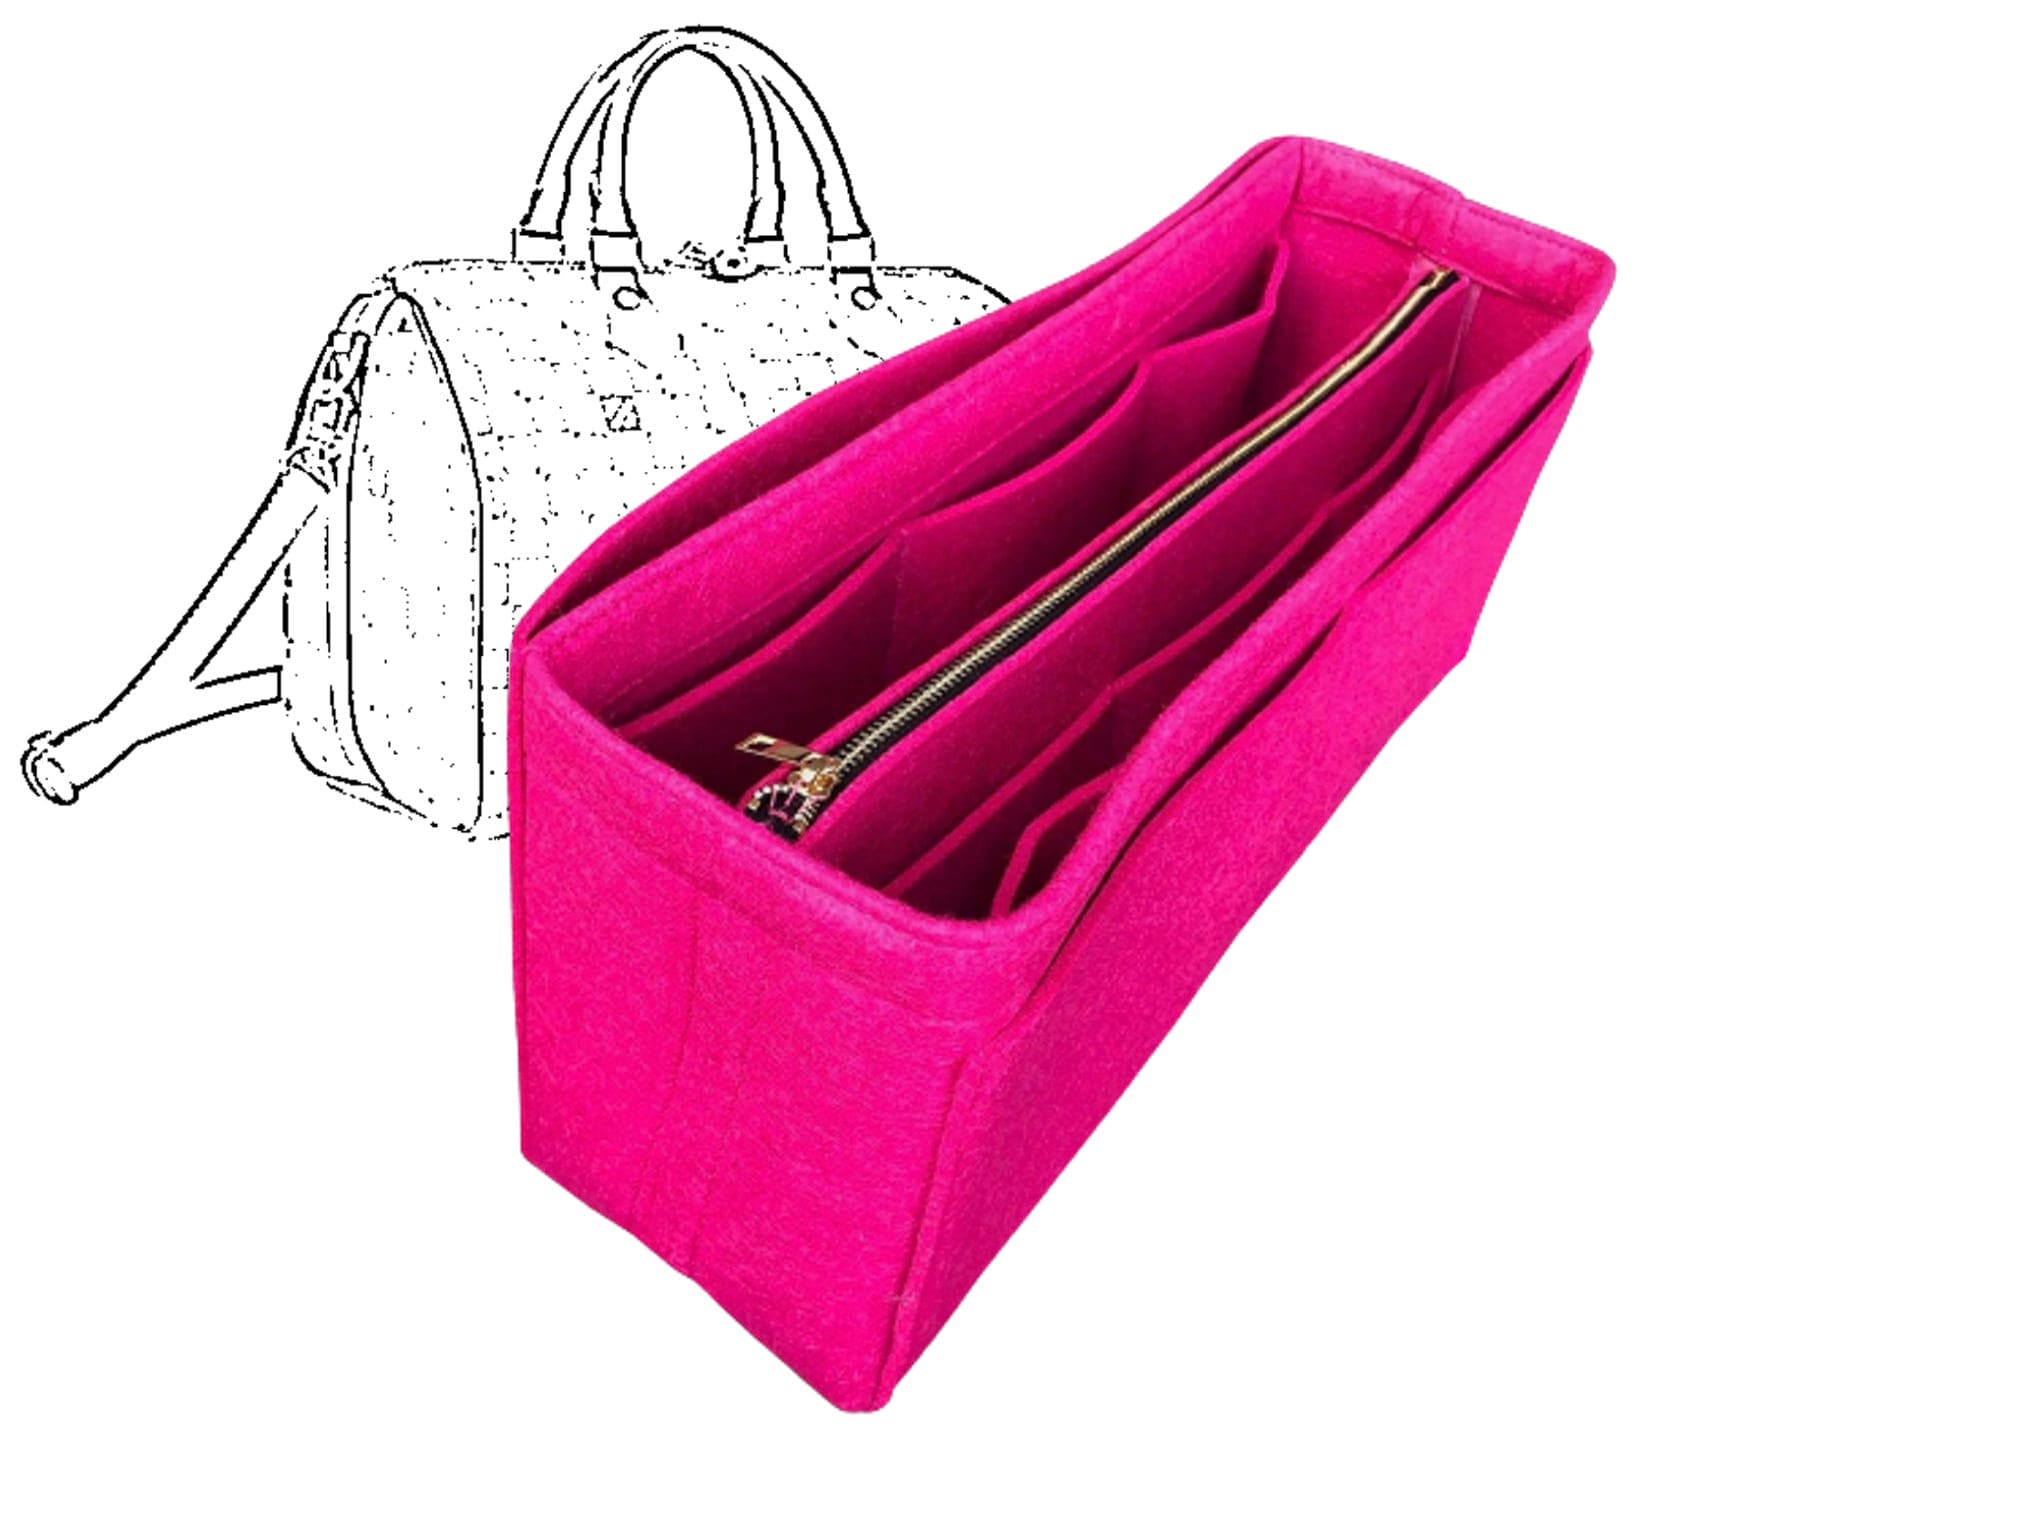 Handbag Organizer with Interior Zipped Pocket for Speedy 25, 30, 35, and 40  (More colors available)